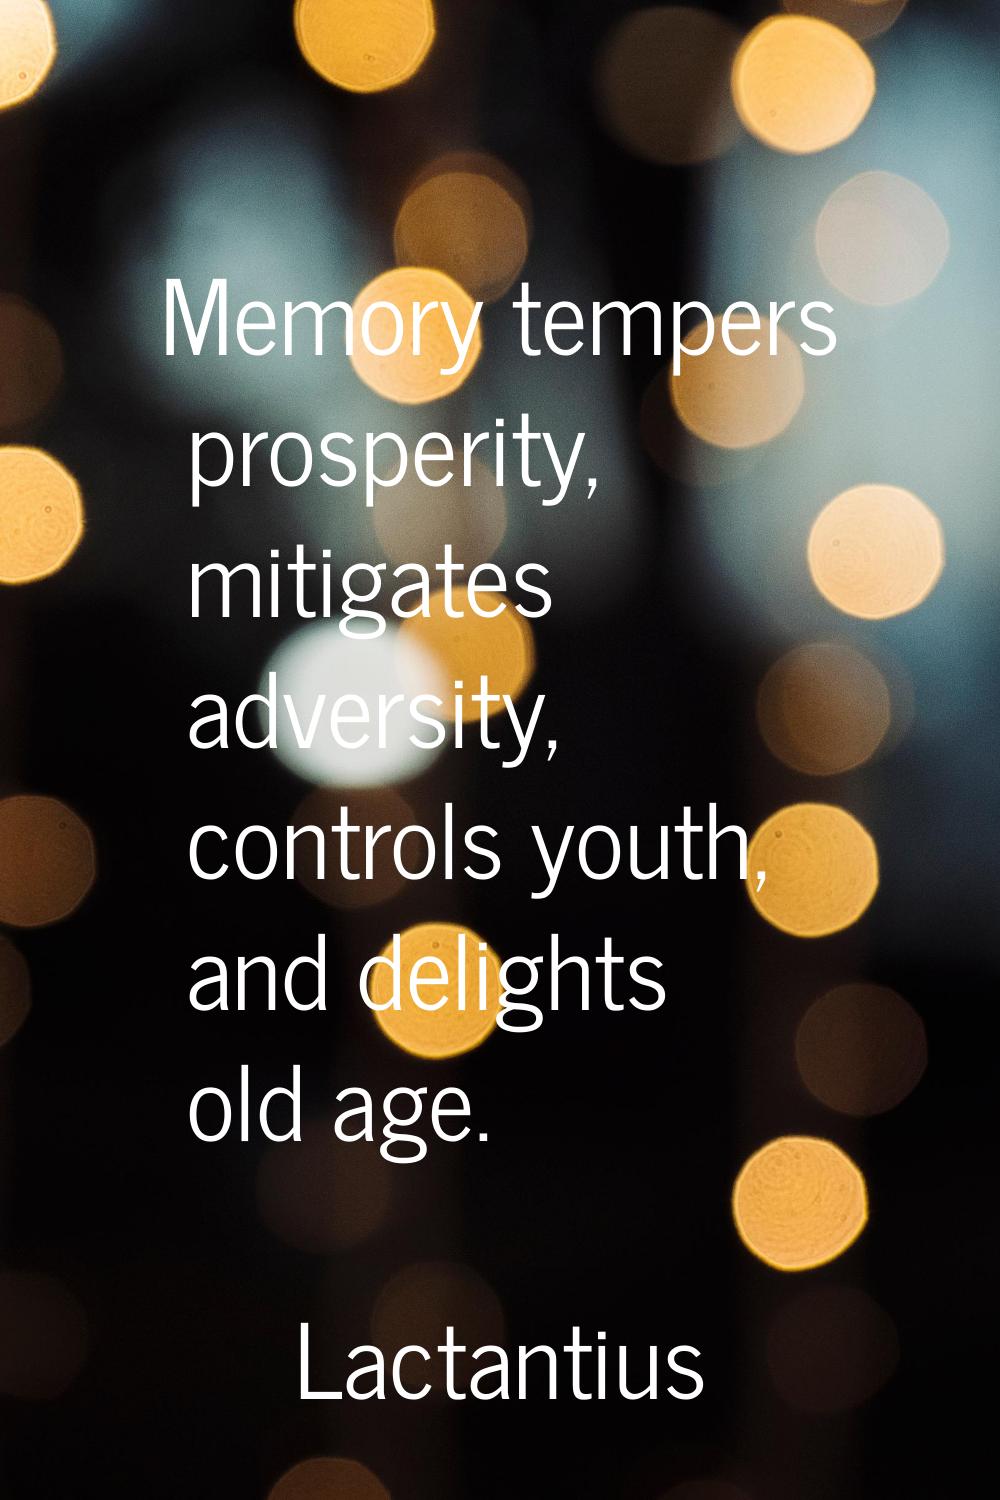 Memory tempers prosperity, mitigates adversity, controls youth, and delights old age.